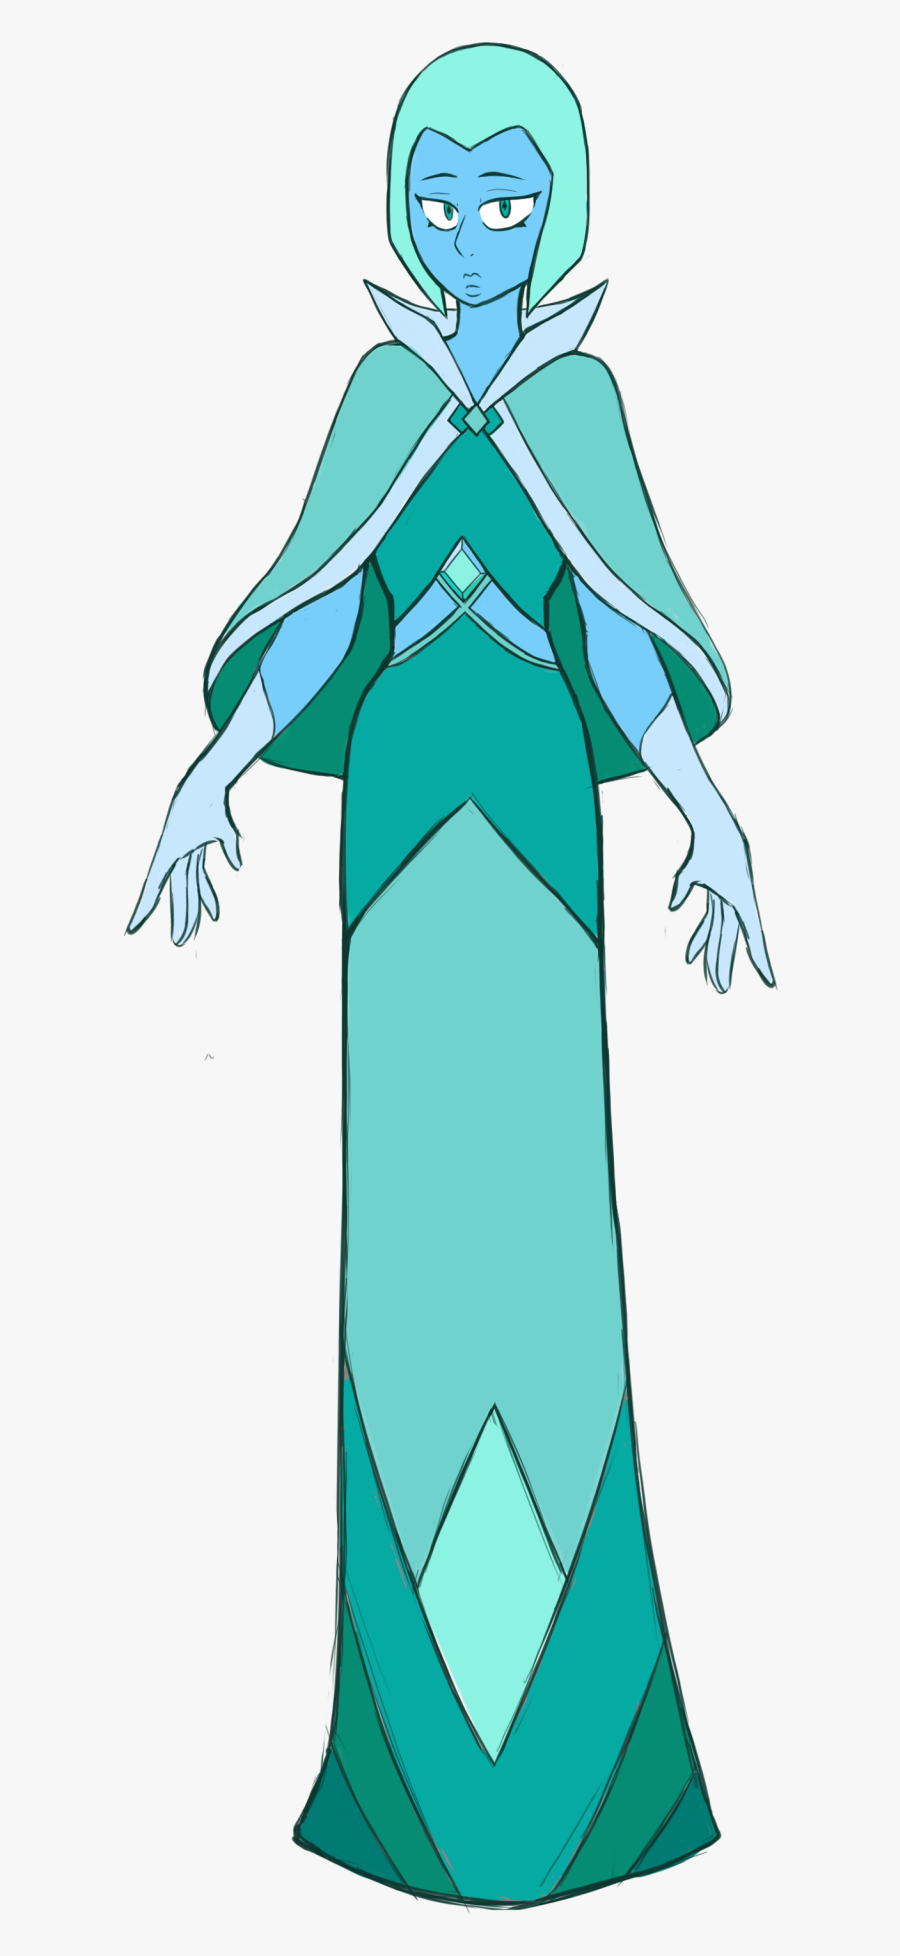 Teal Diamond Is A Relatively Fair And Just Leader,, Transparent Clipart